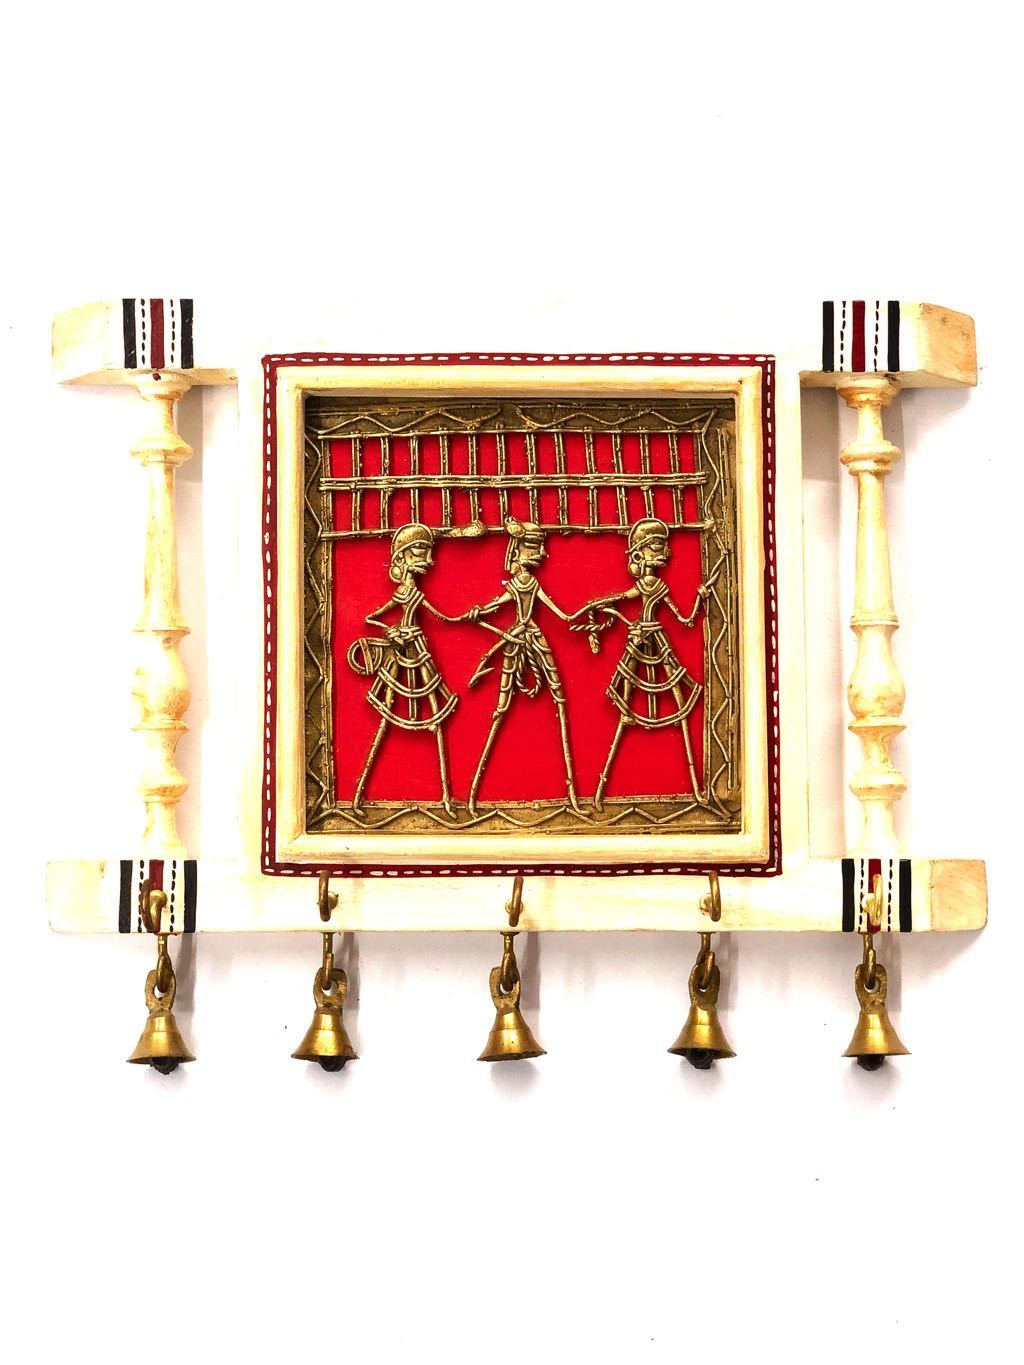 Home Utility For Your Set Of Keys In Indian Art Depiction Décor By Tamrapatra